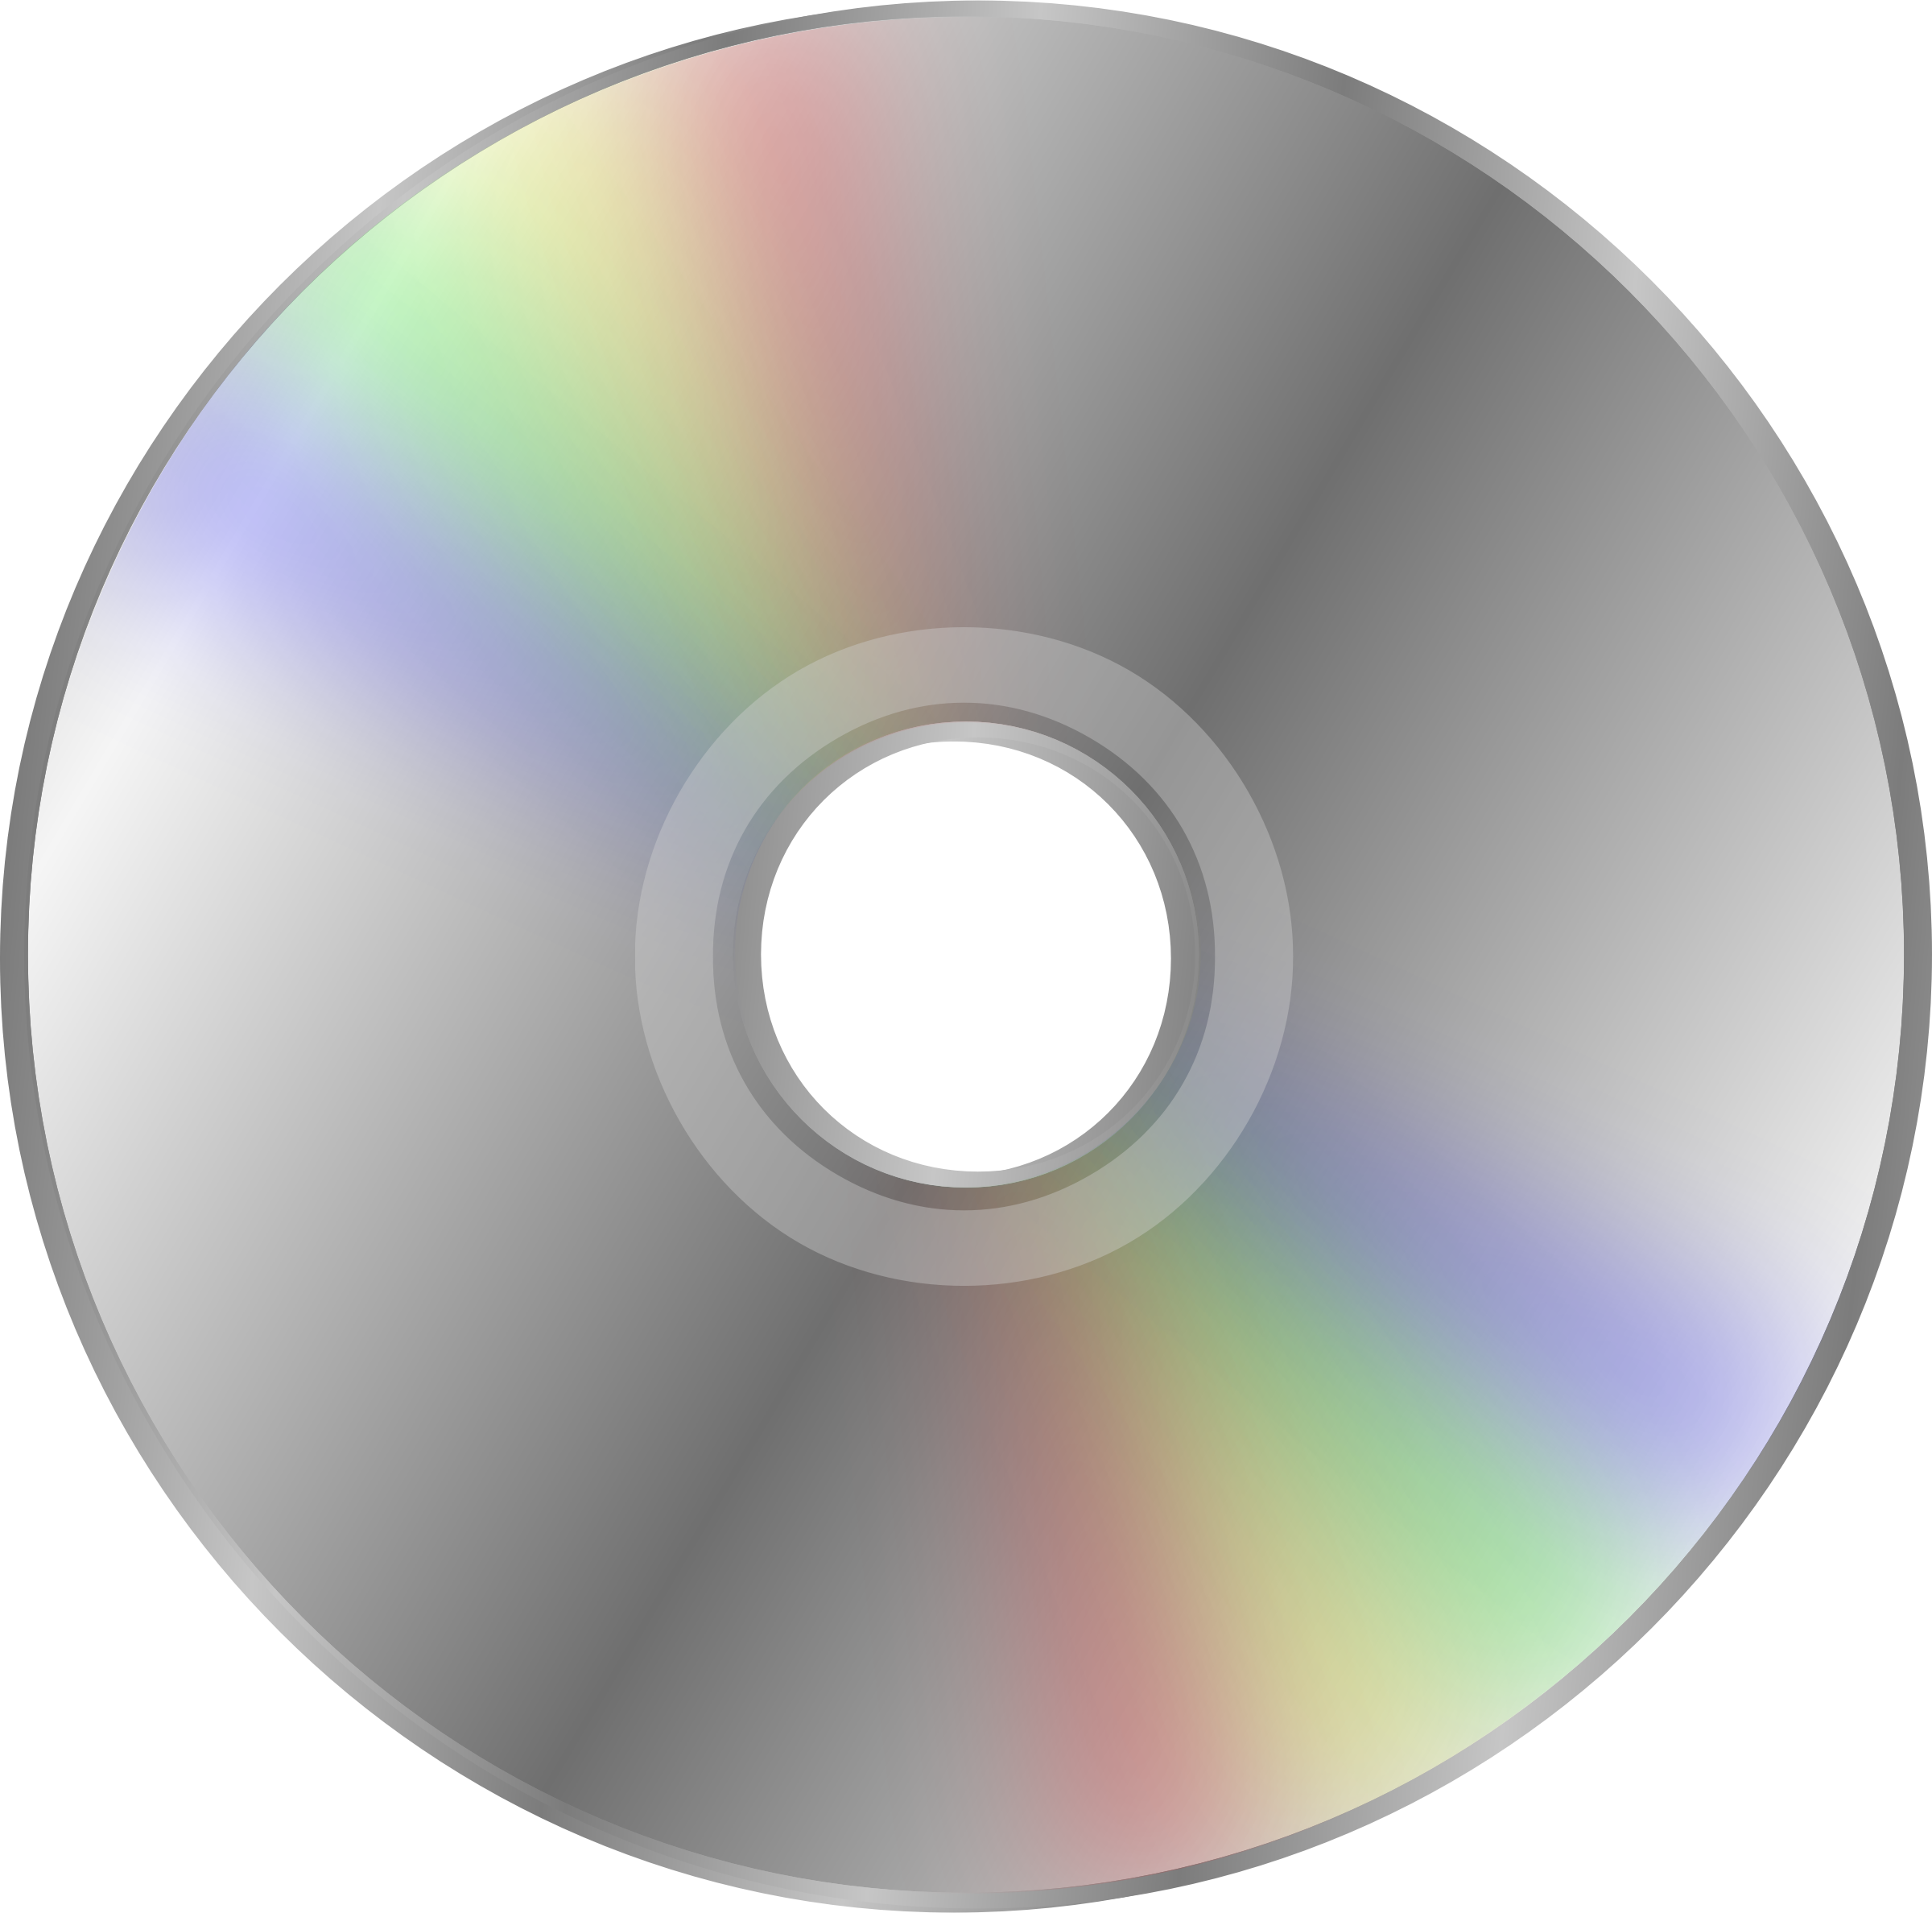 cd clipart cd stack